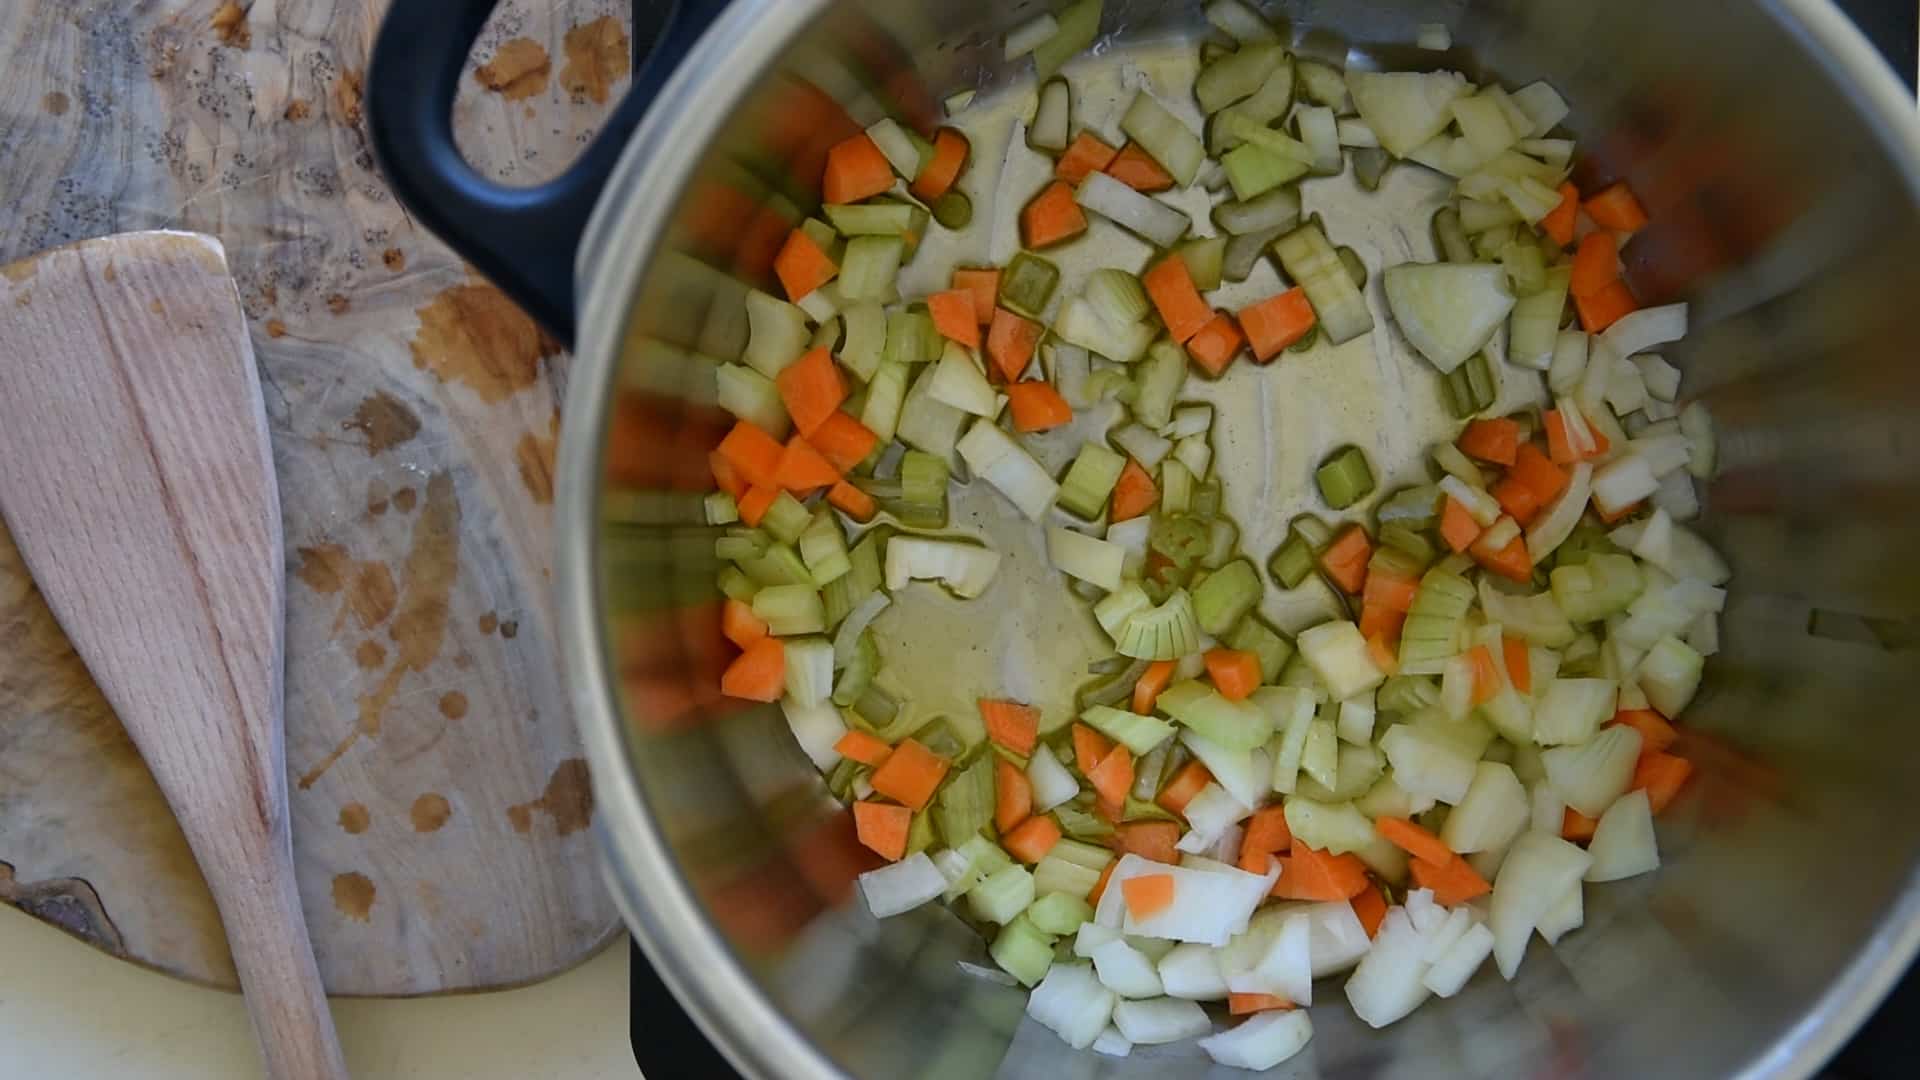 Stir the mixture so the vegetables are well-coated